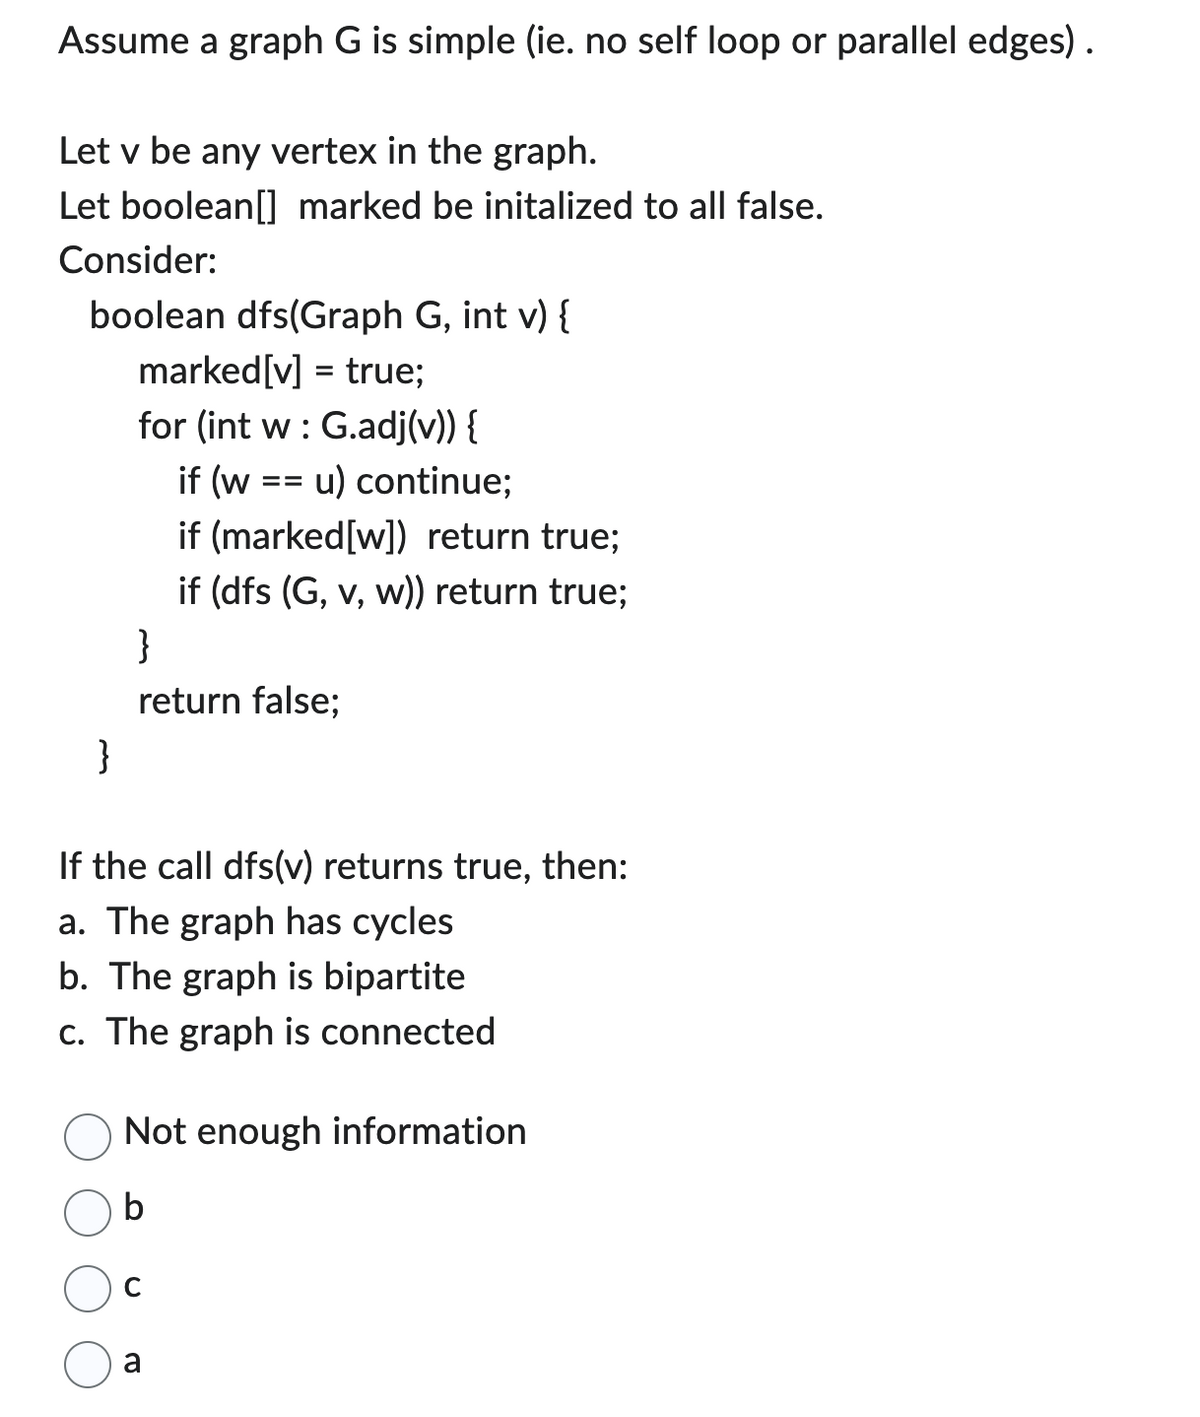 Assume a graph G is simple (ie. no self loop or parallel edges).
Let v be any vertex in the graph.
Let boolean[] marked be initalized to all false.
Consider:
boolean dfs(Graph G, int v) {
marked[v] = true;
for (int w: G.adj(v)) {
if (w
}
u) continue;
if (marked[w]) return true;
if (dfs (G, v, w)) return true;
}
return false;
==
If the call dfs(v) returns true, then:
a. The graph has cycles
b. The graph is bipartite
c. The graph is connected
Not enough information
a